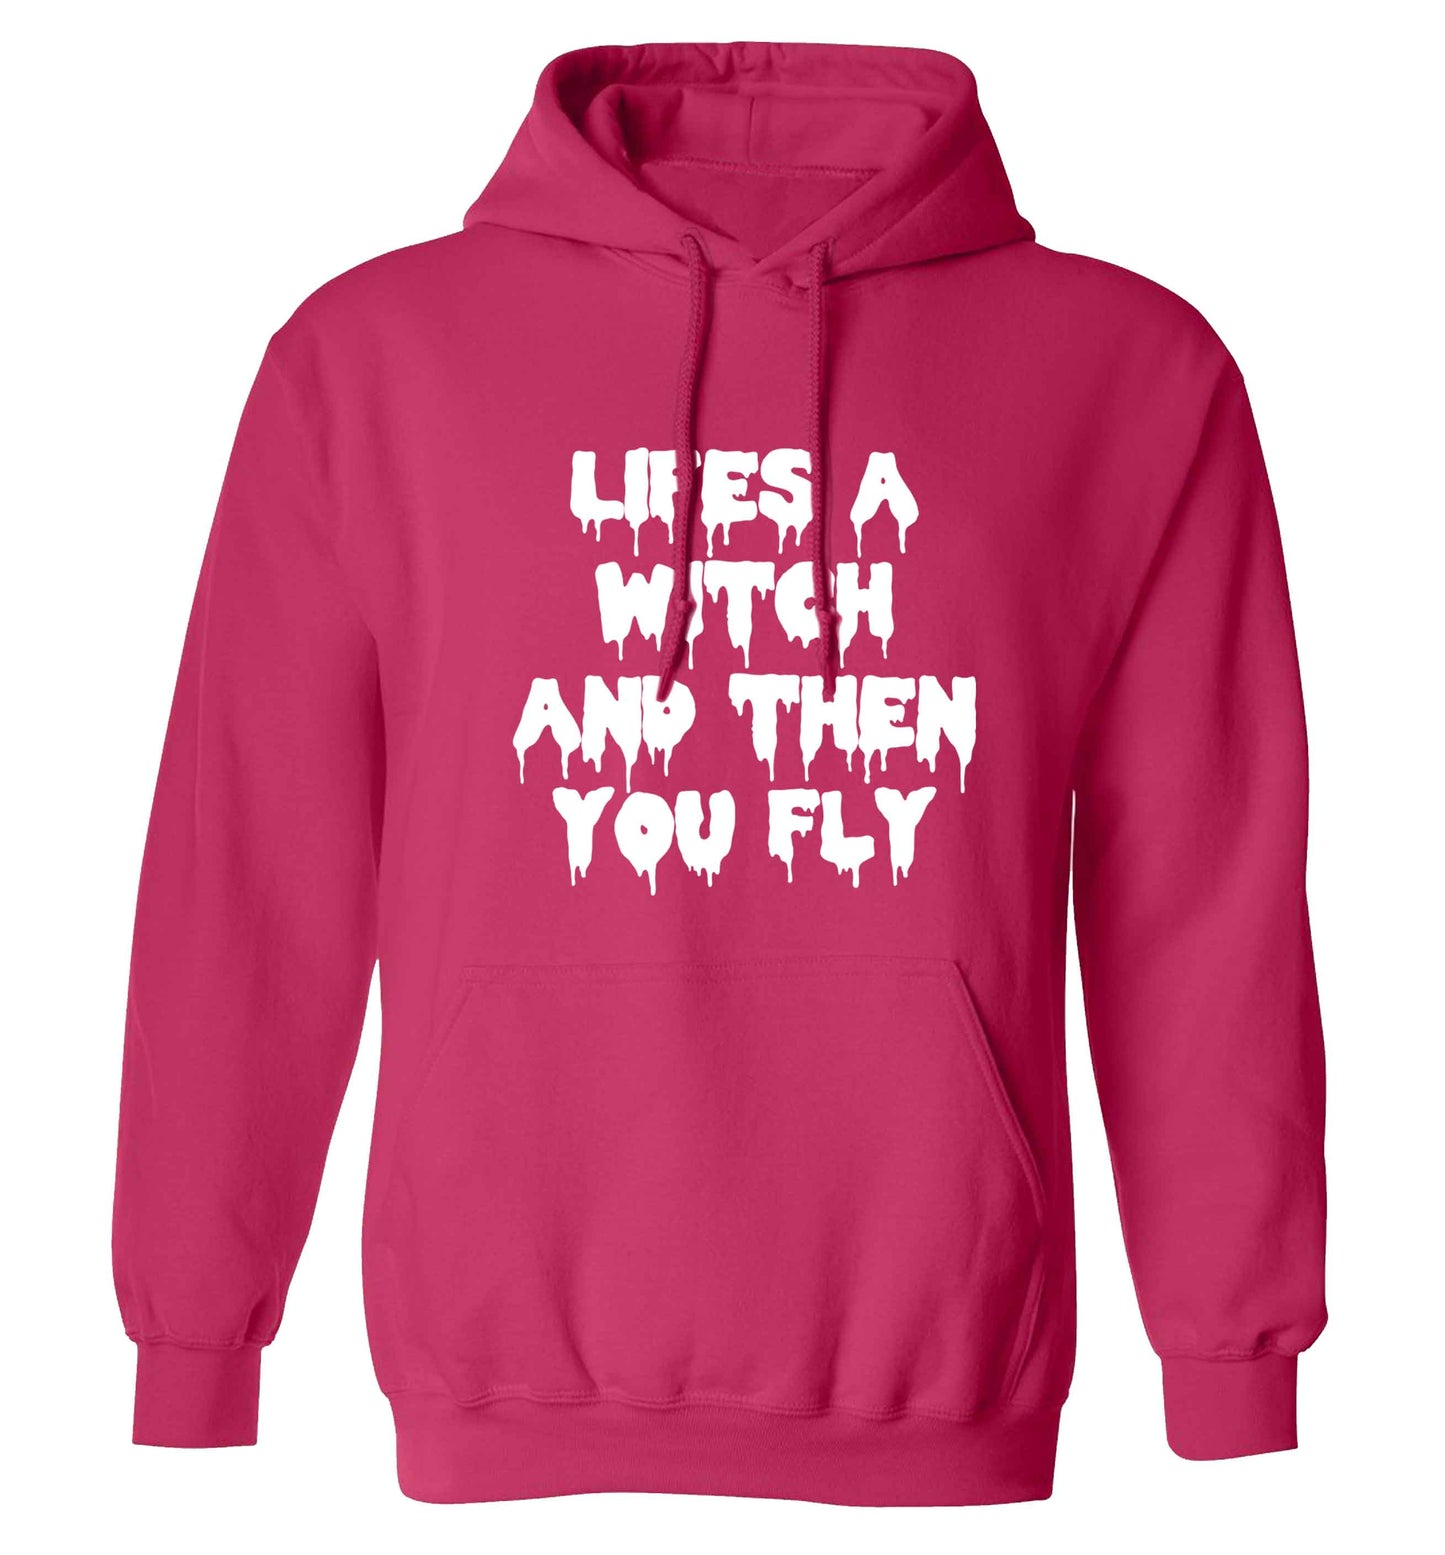 Life's a witch and then you fly adults unisex pink hoodie 2XL